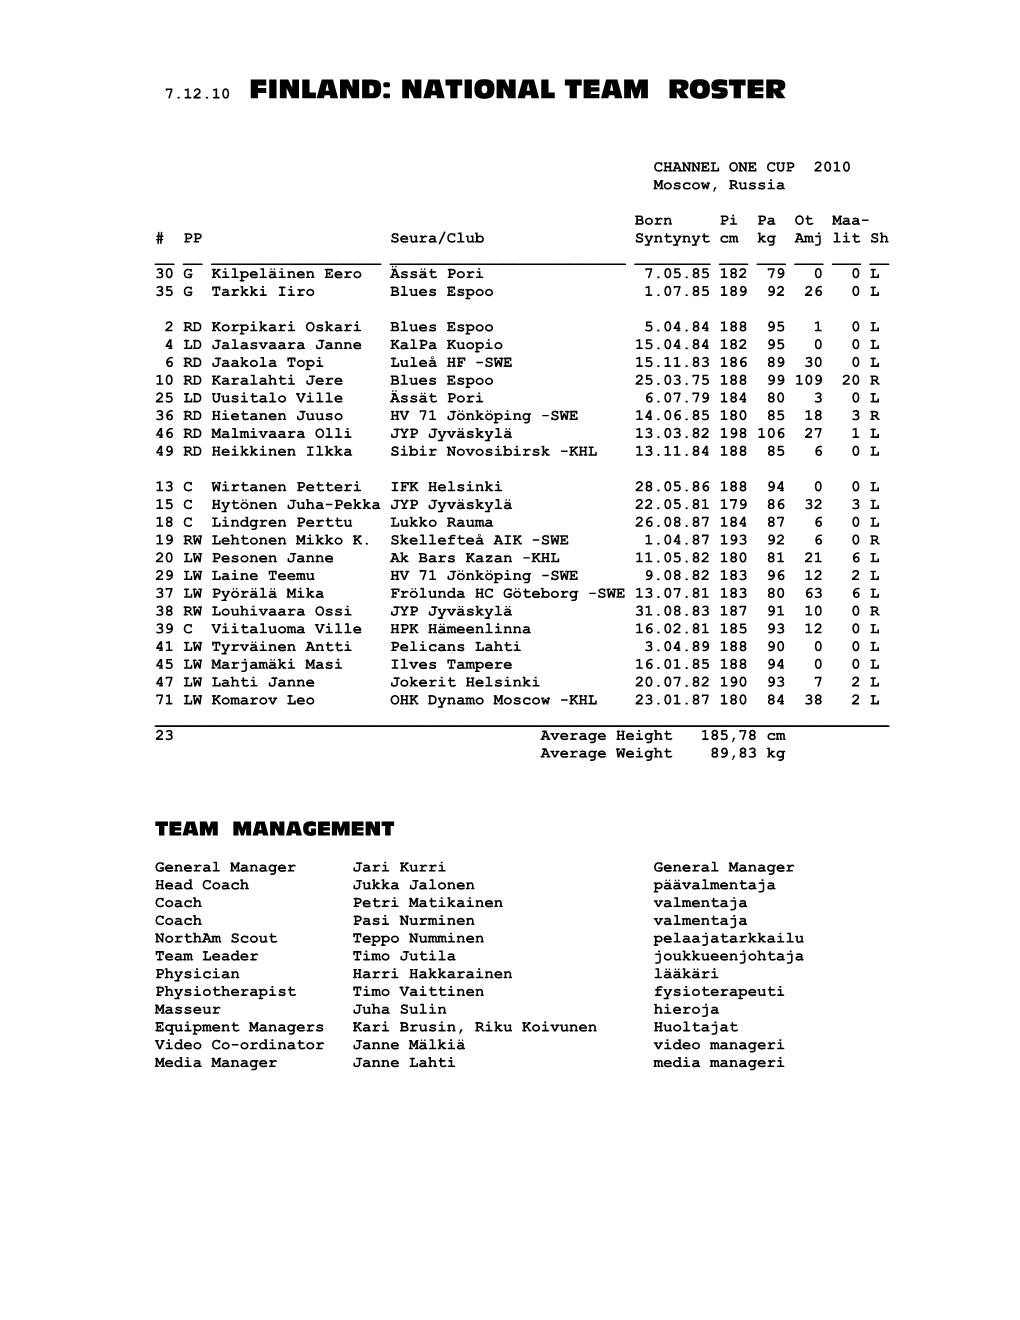 7.12.10 Finland: National Team Roster